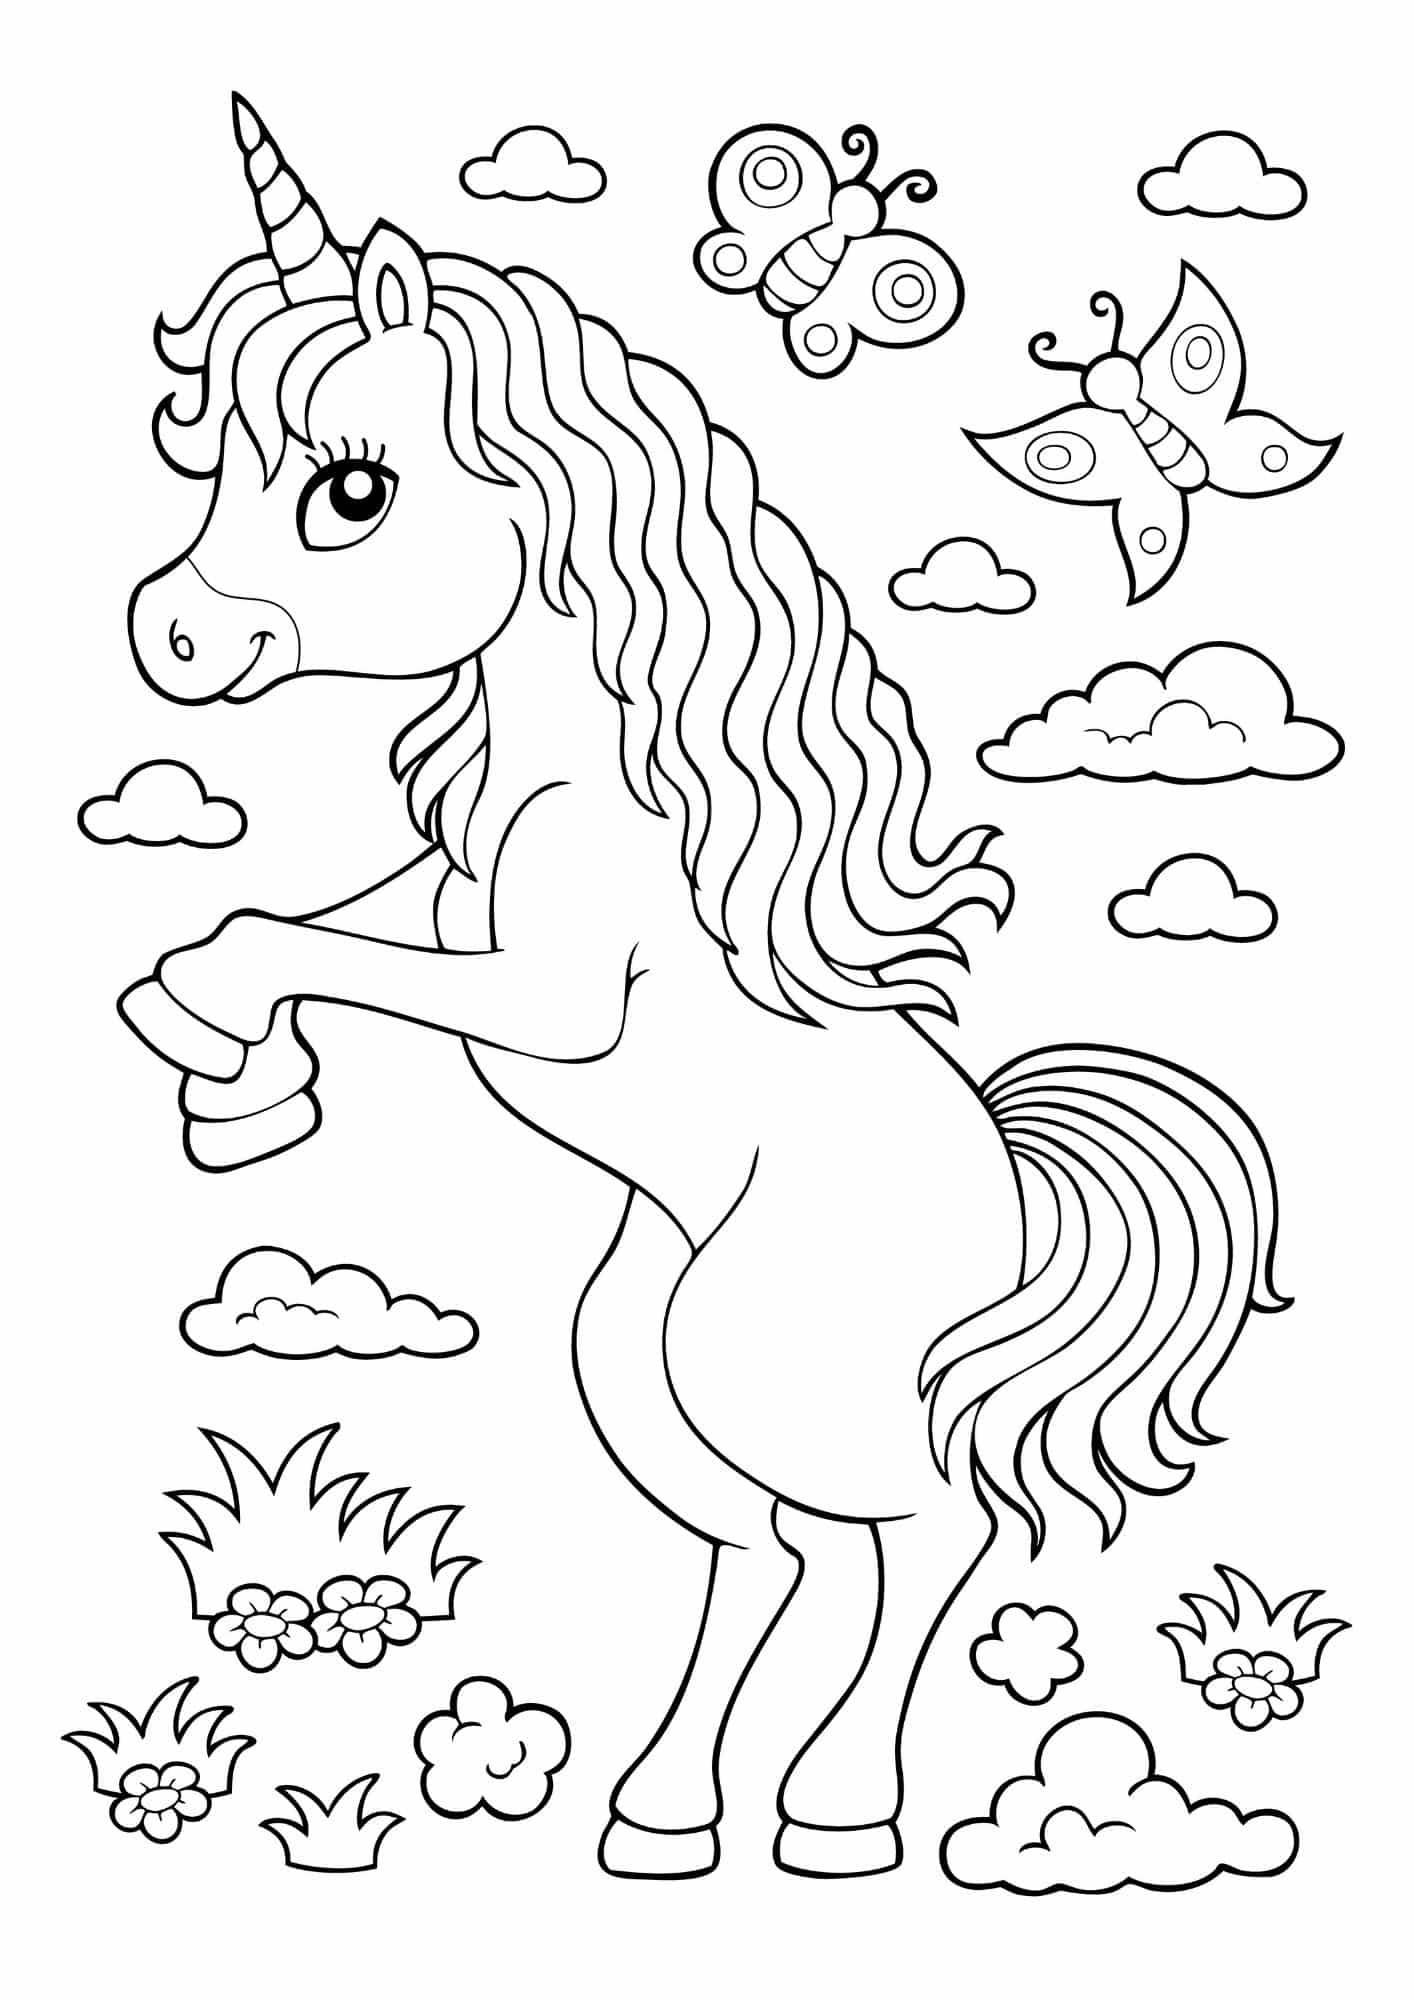 Free unicorn printable activities for kids - The Mummy Bubble